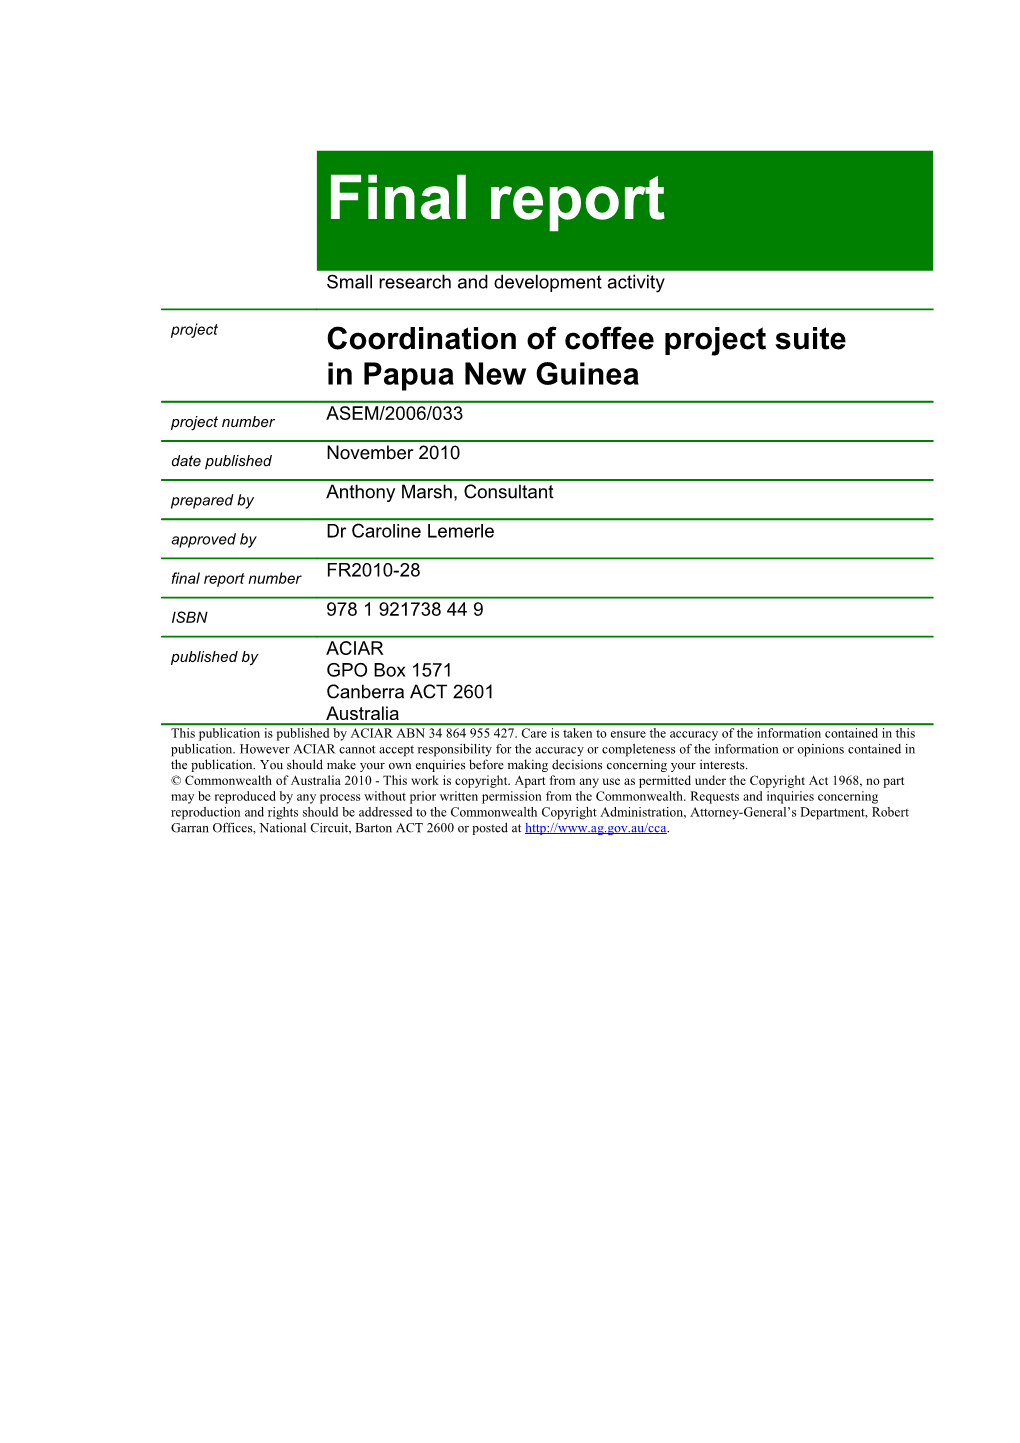 Final Report: Coordination of Coffee Project Suite in Papua New Guinea